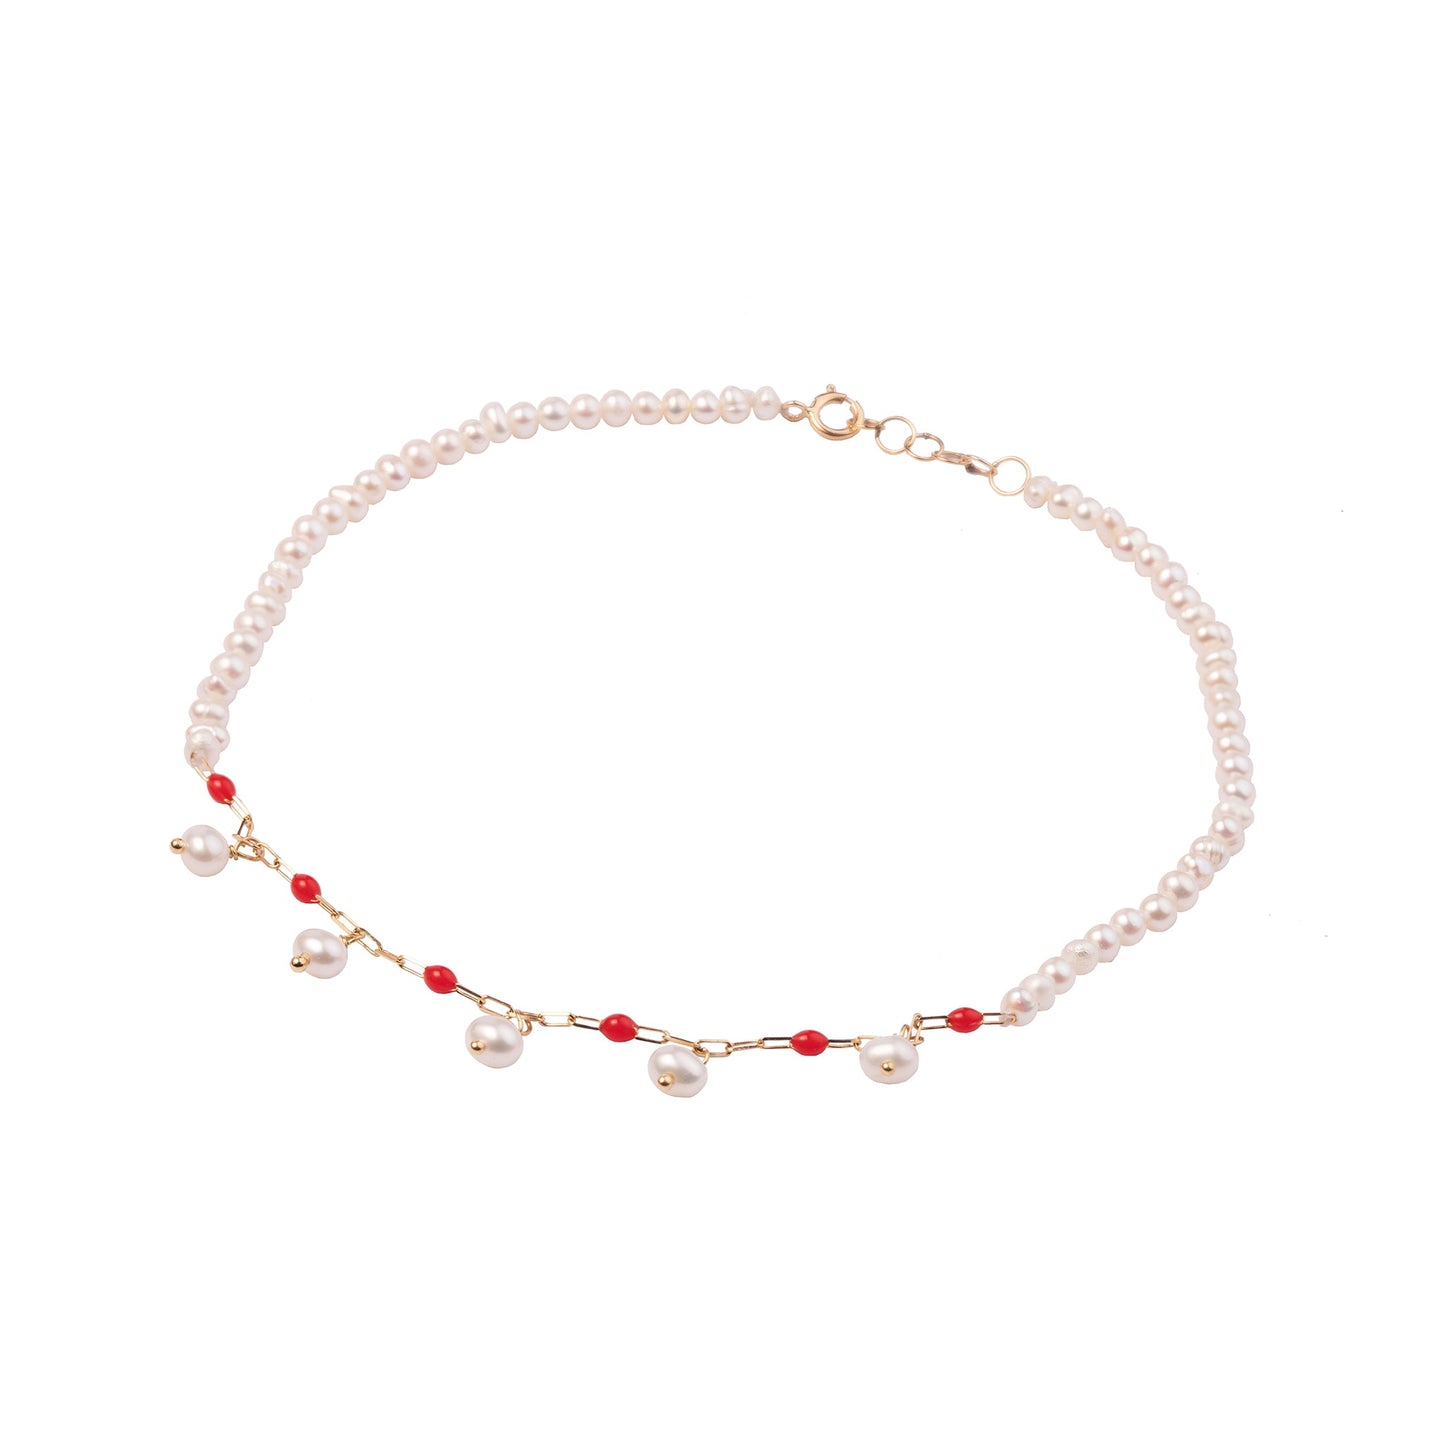 The Beach Pearls Anklet - Oria.jewelry